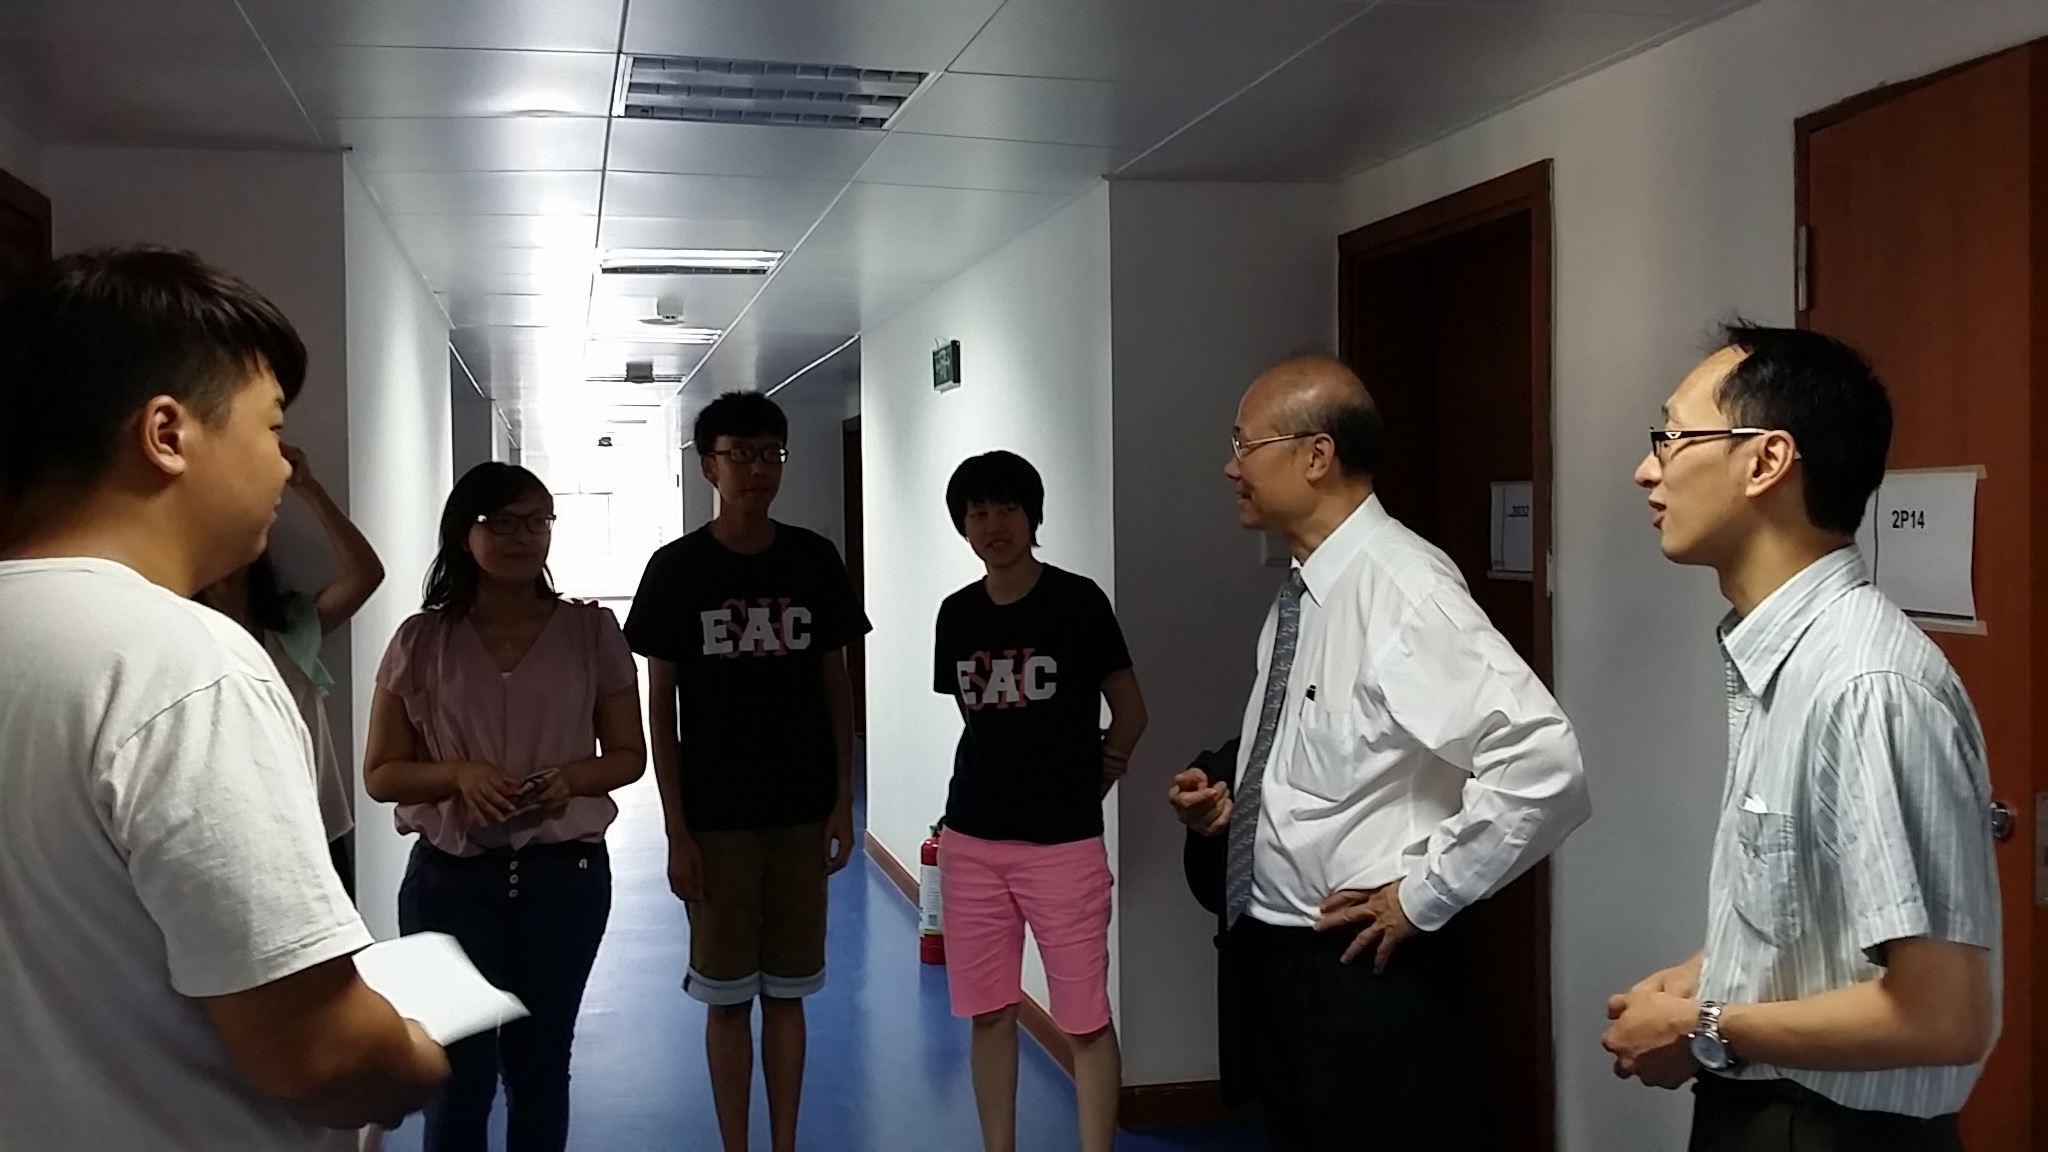 Dr. So visited a student room in the College 蘇博士參觀學生房間